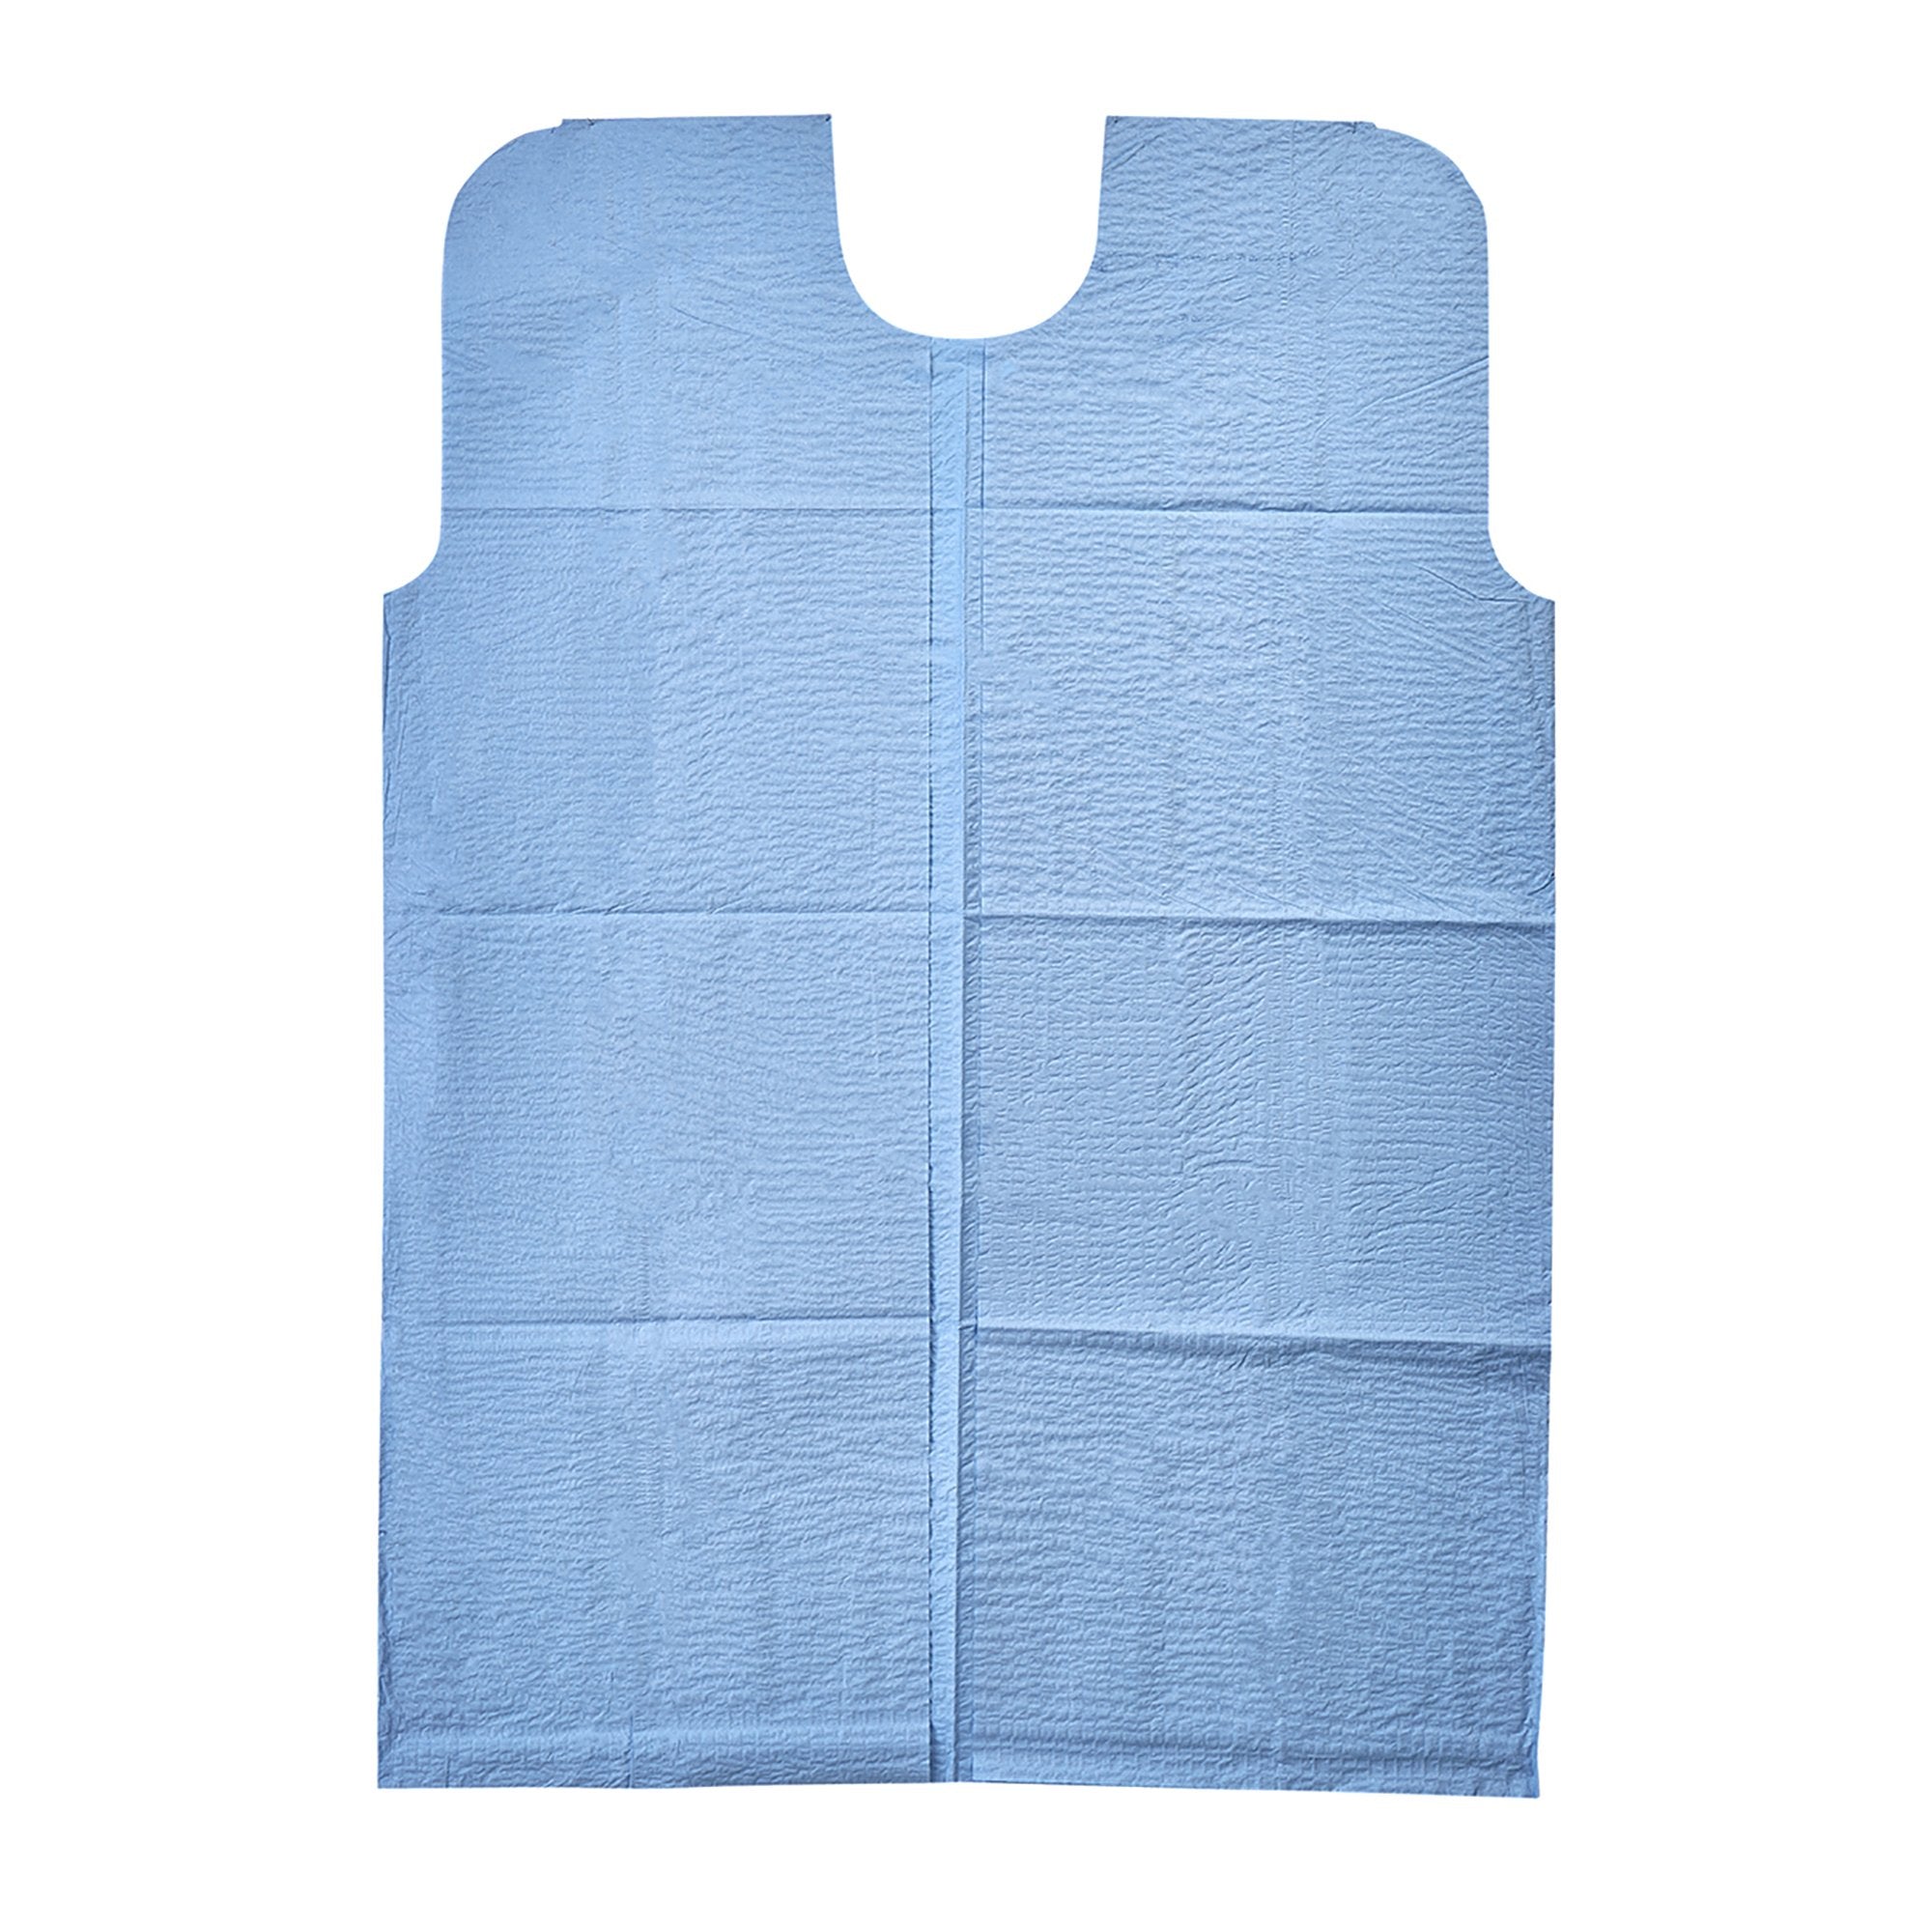 Graham Medical Products Patient Exam Gown Sleeveless Waist Tie, Medium/Large, Blue -Case of 50